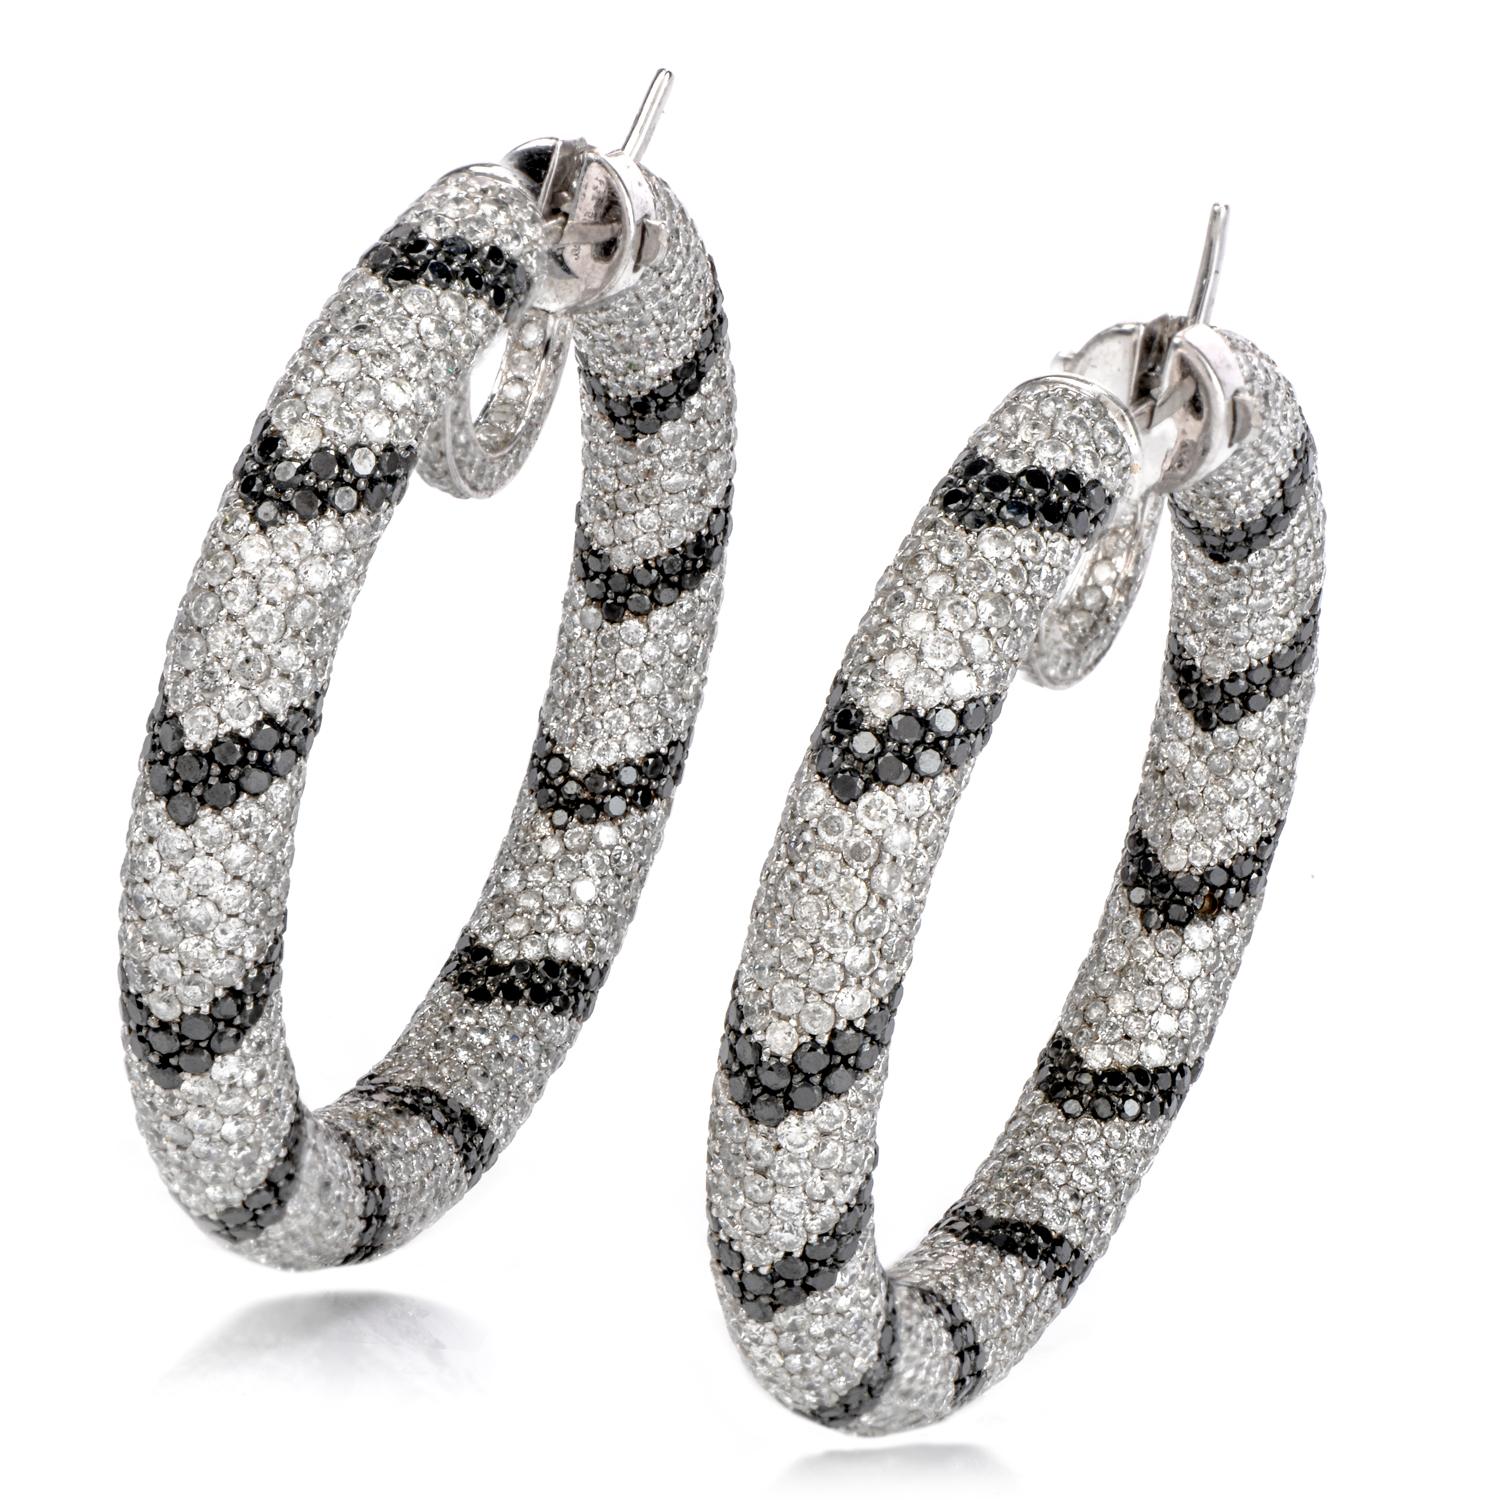 Give your style a twist with these special and unique 17.21 Carat Black & White Diamond 14K Gold Stripe Hoop Earrings.  The black and white diamonds are complemented by the bright 14K white gold hoop settings.  The diamonds form chevron alternating